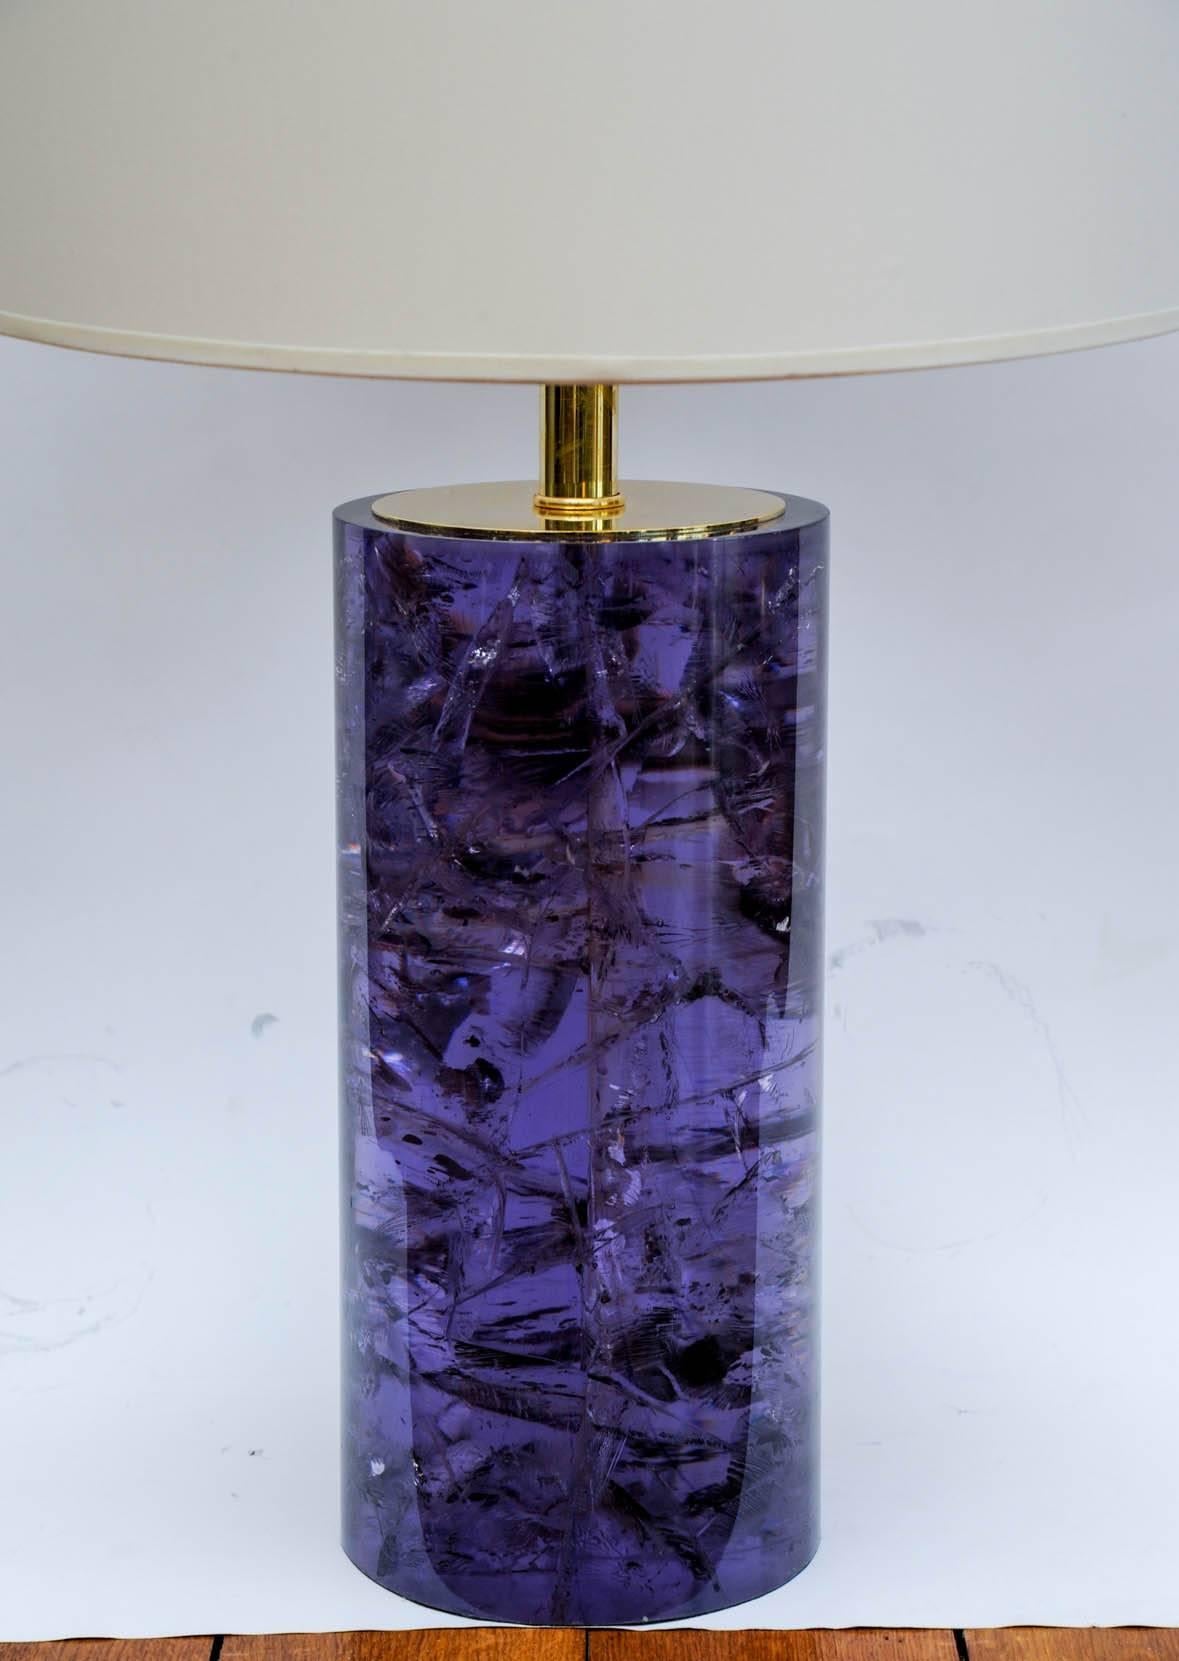 Pair of table lamp made of a cylinder of vibrant purple fractal resin, ended by a polished brass plate.